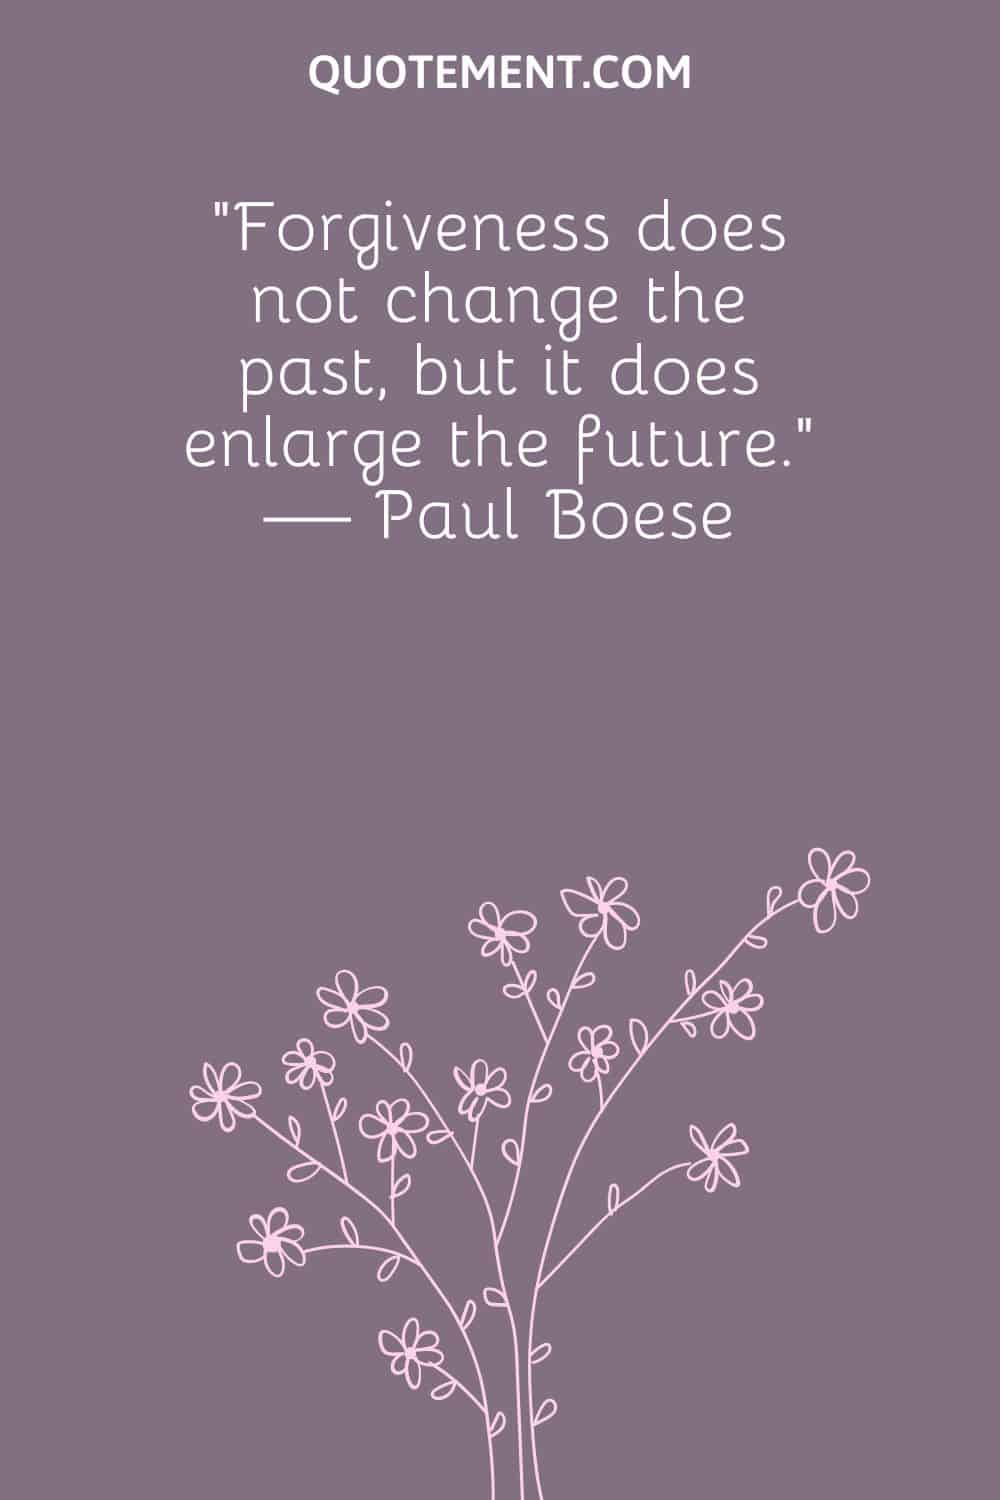 “Forgiveness does not change the past, but it does enlarge the future.” — Paul Boese